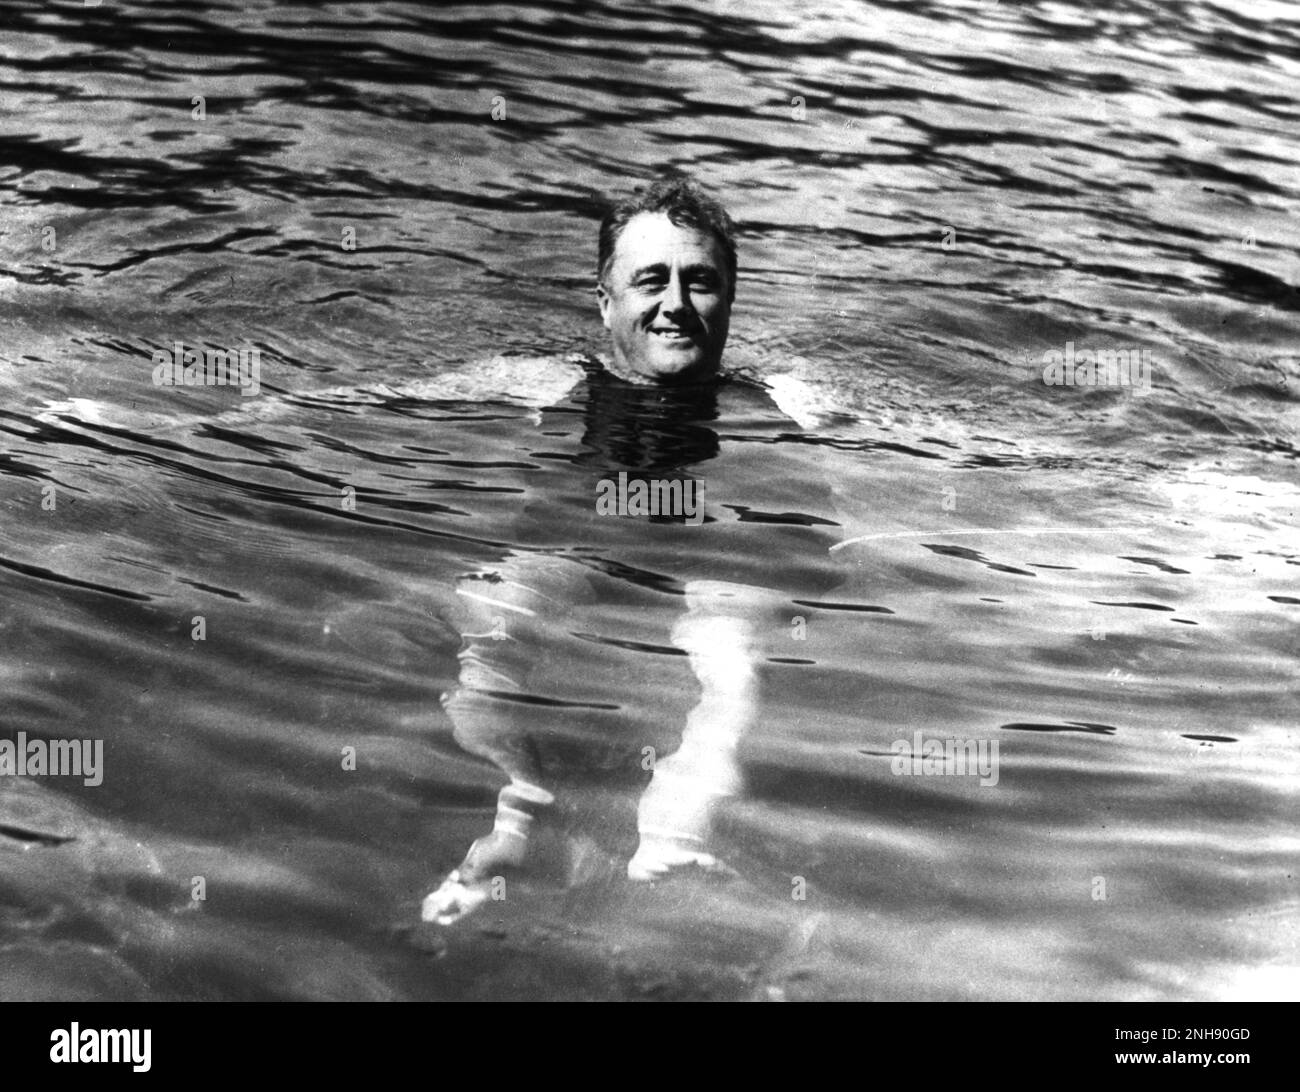 Franklin Delano Roosevelt swimming in a therapy pool in Warm Springs, Georgia, October 1925, four years after contracting polio. Stock Photo